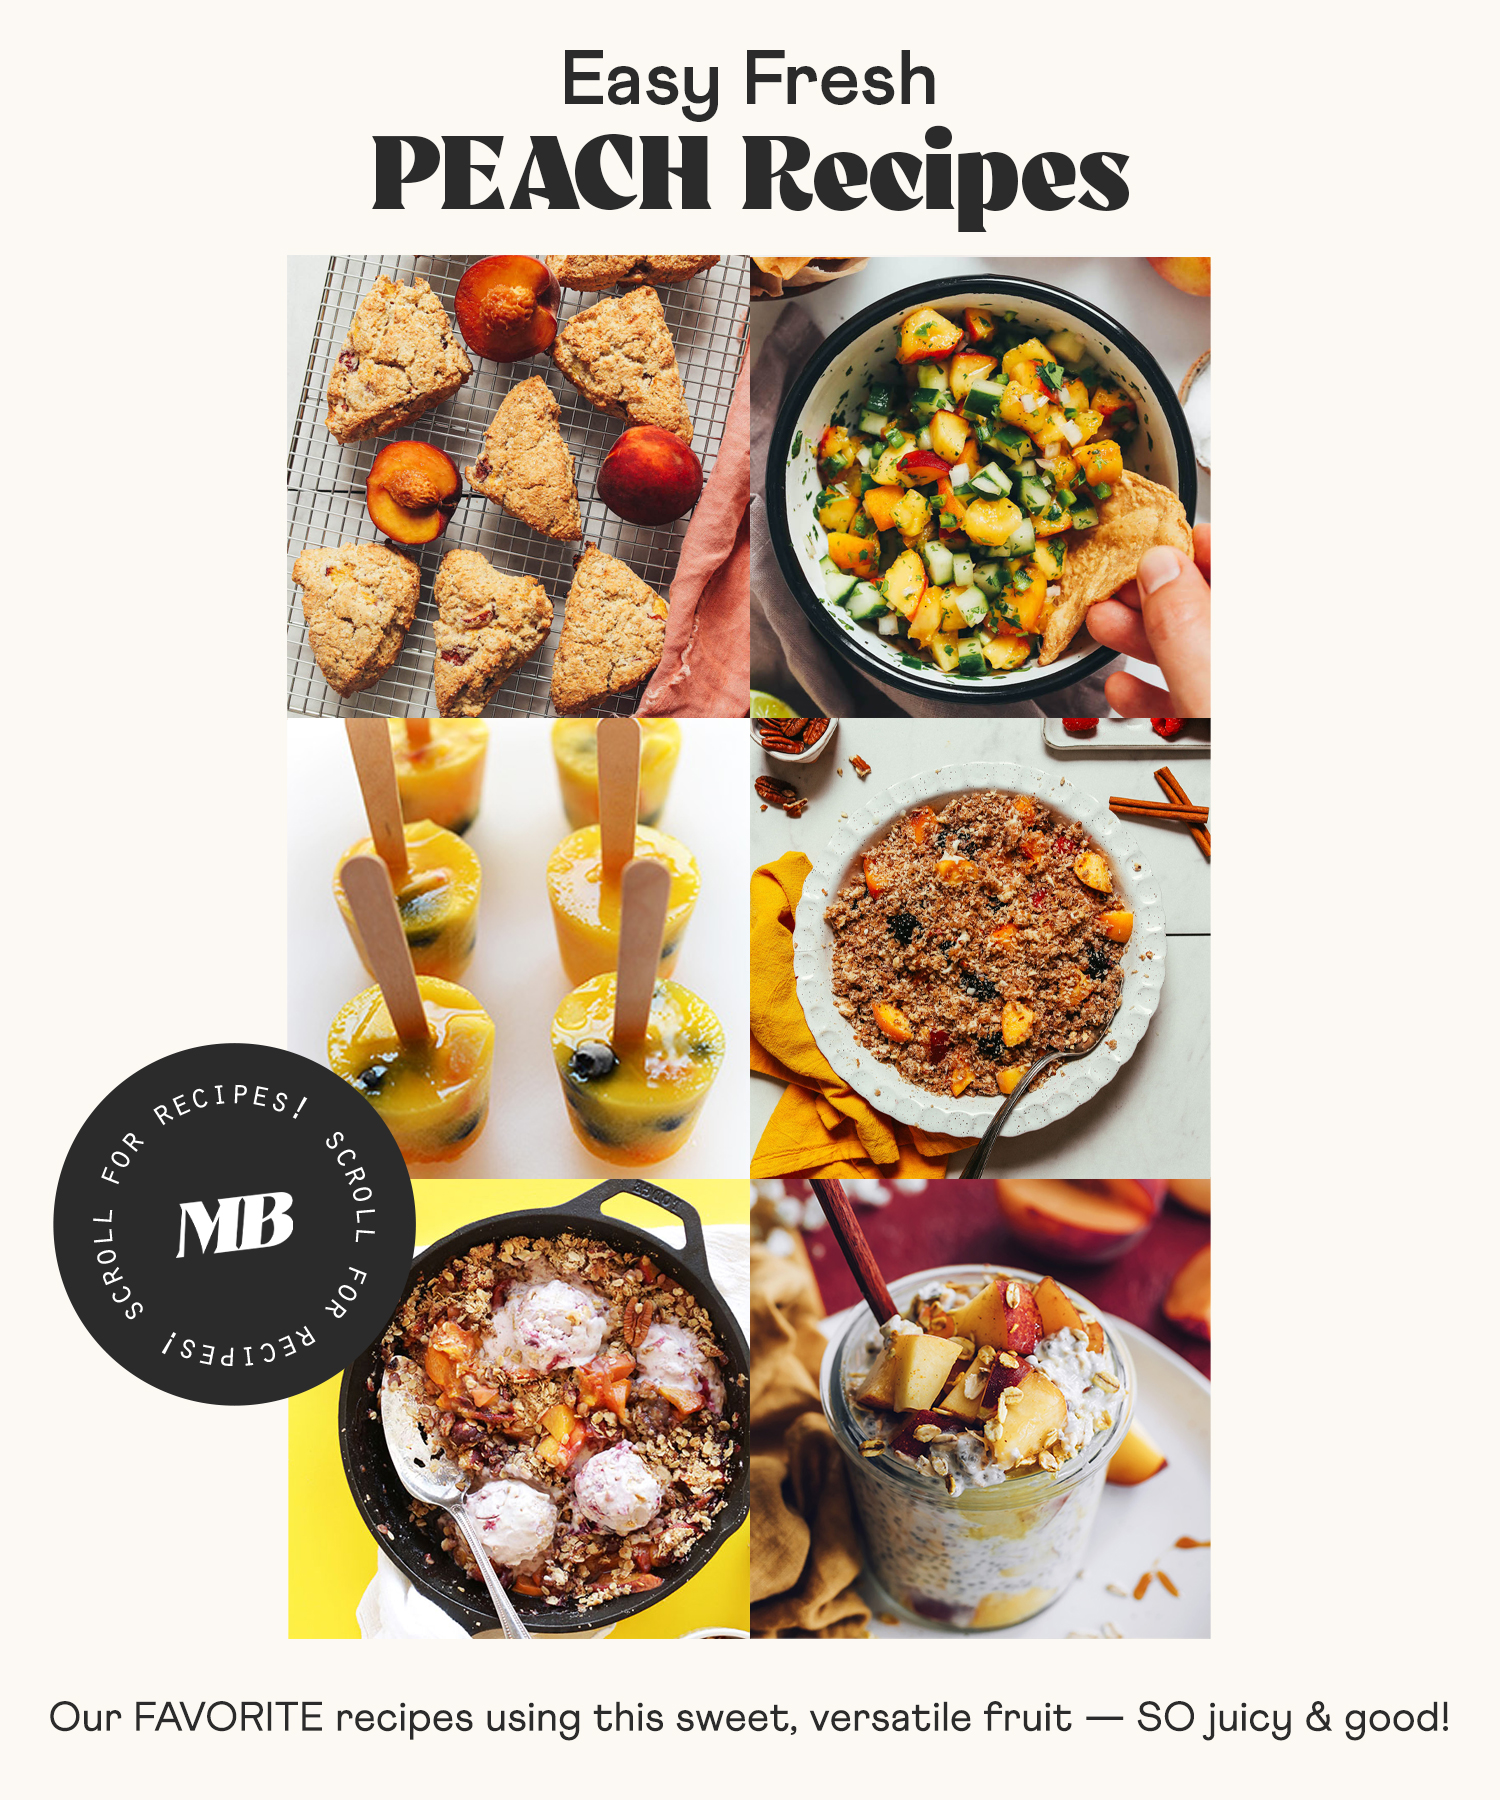 Scones, salsa, popsicles, peach crisp, and other recipes using fresh peaches